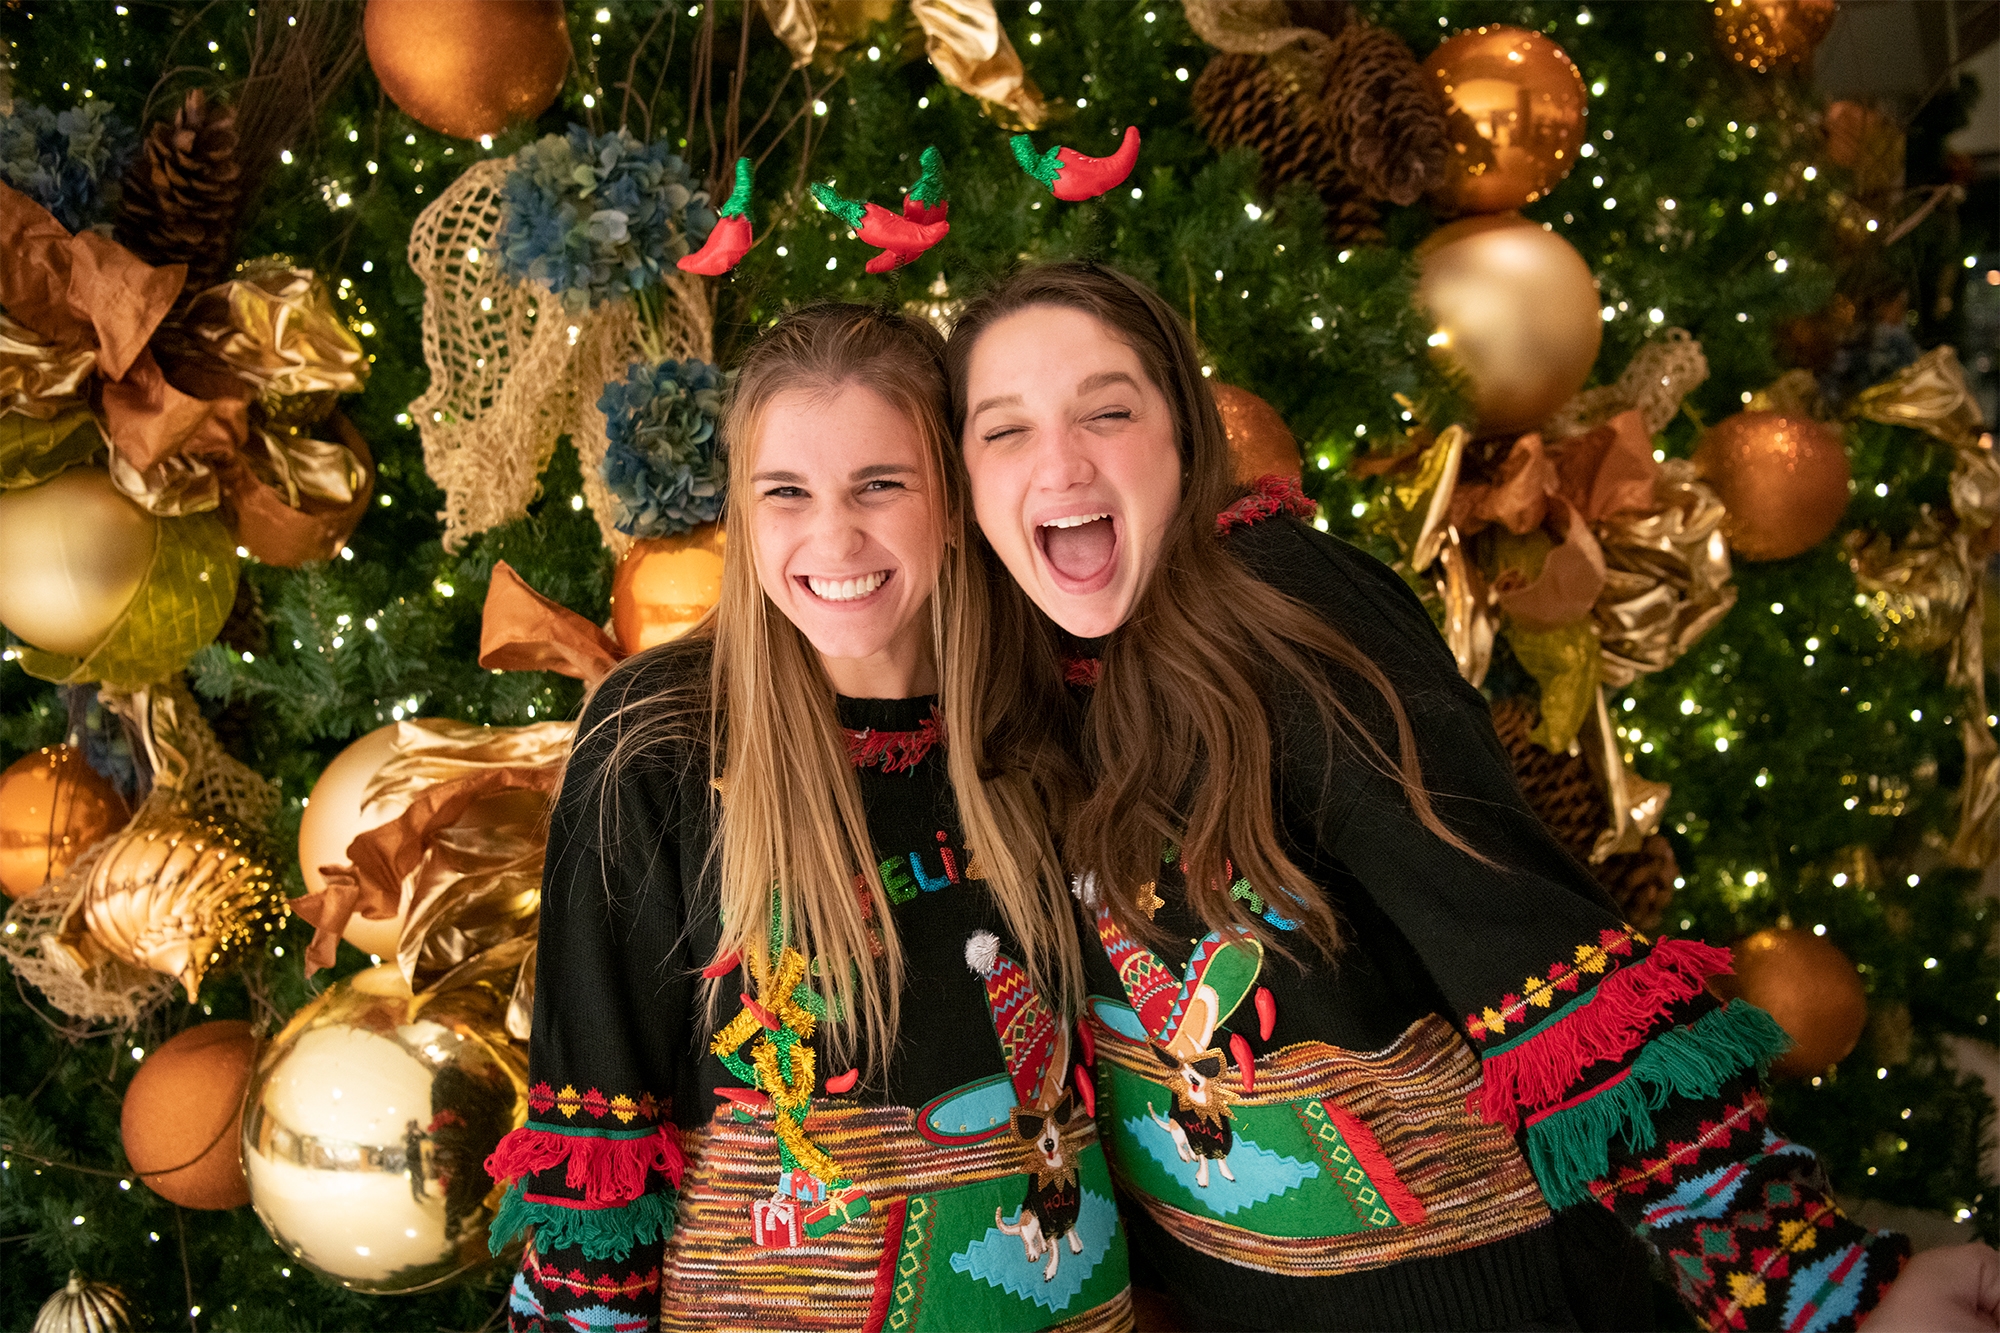 Girls enjoy christmas decorations in the Commons.